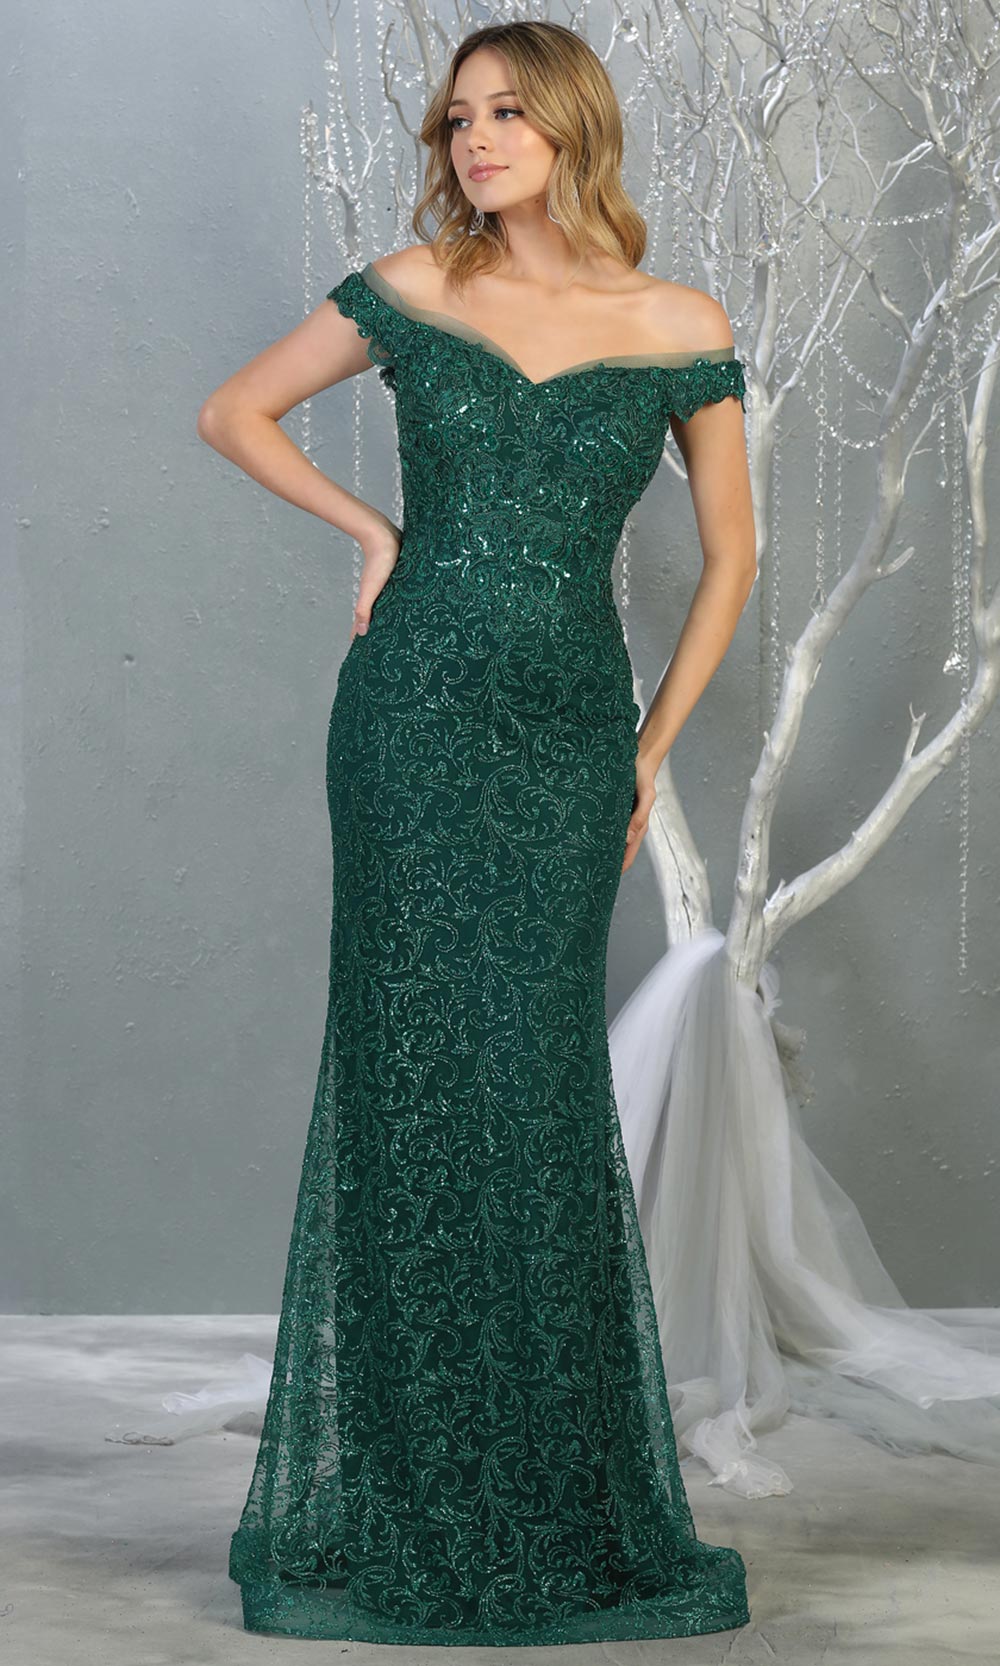 Mayqueen RQ7879 long hunter green sequin off shoulder evening mermaid dress.Full length sleek & sexy fitted dress is perfect for  enagagement/e-shoot dress, formal wedding guest, evening party dress, prom, black tie, indowestern. Plus sizes avail.jpg